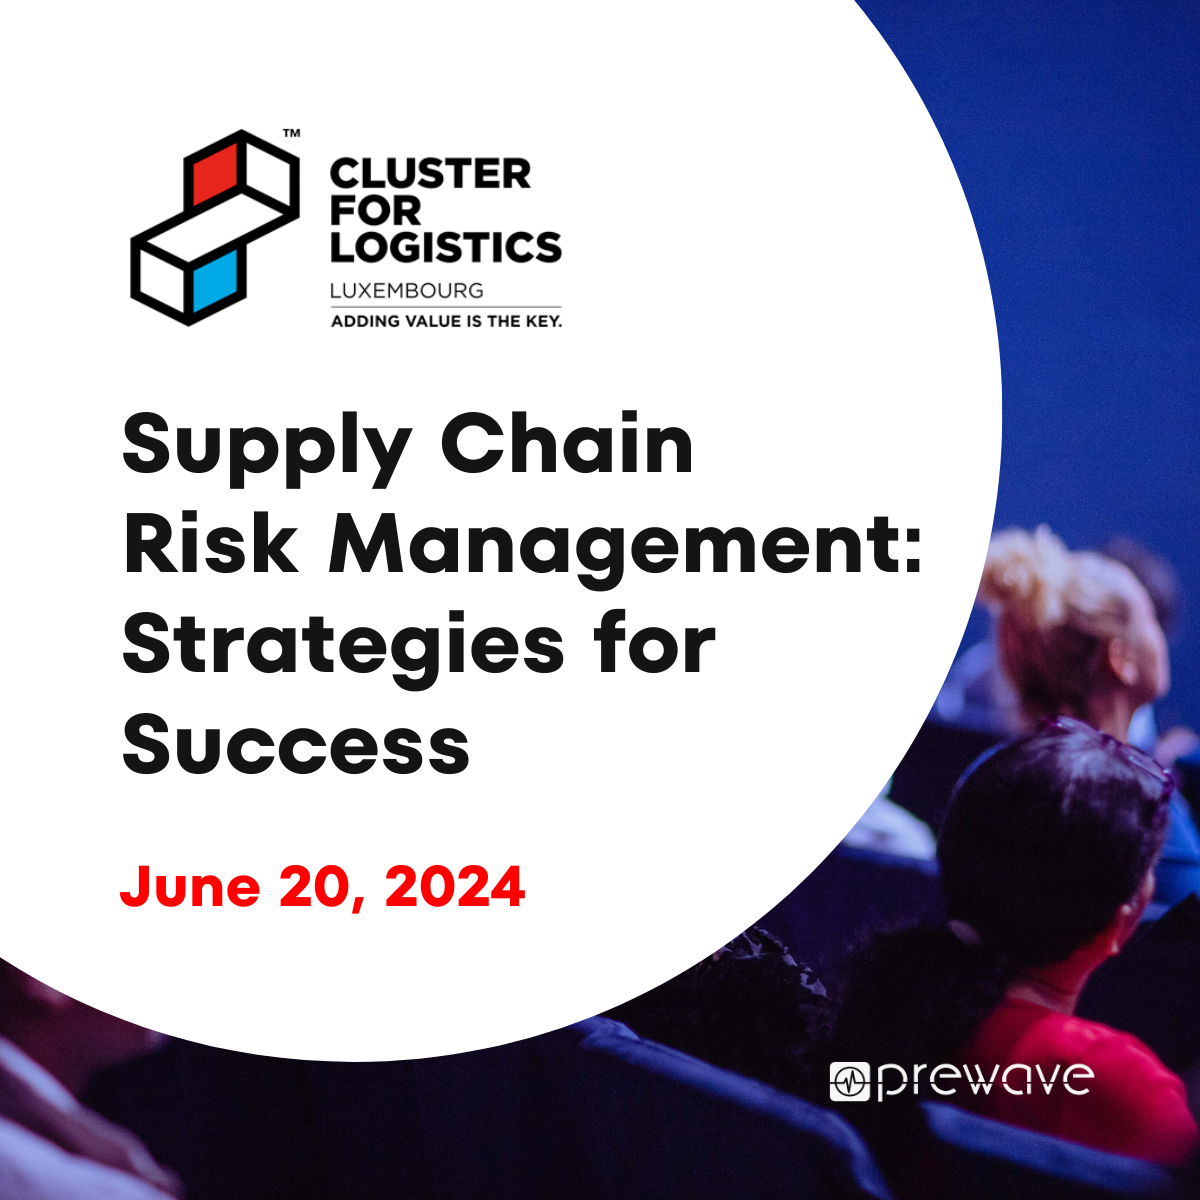 Supply Chain Risk Management Event - Strategies for Success